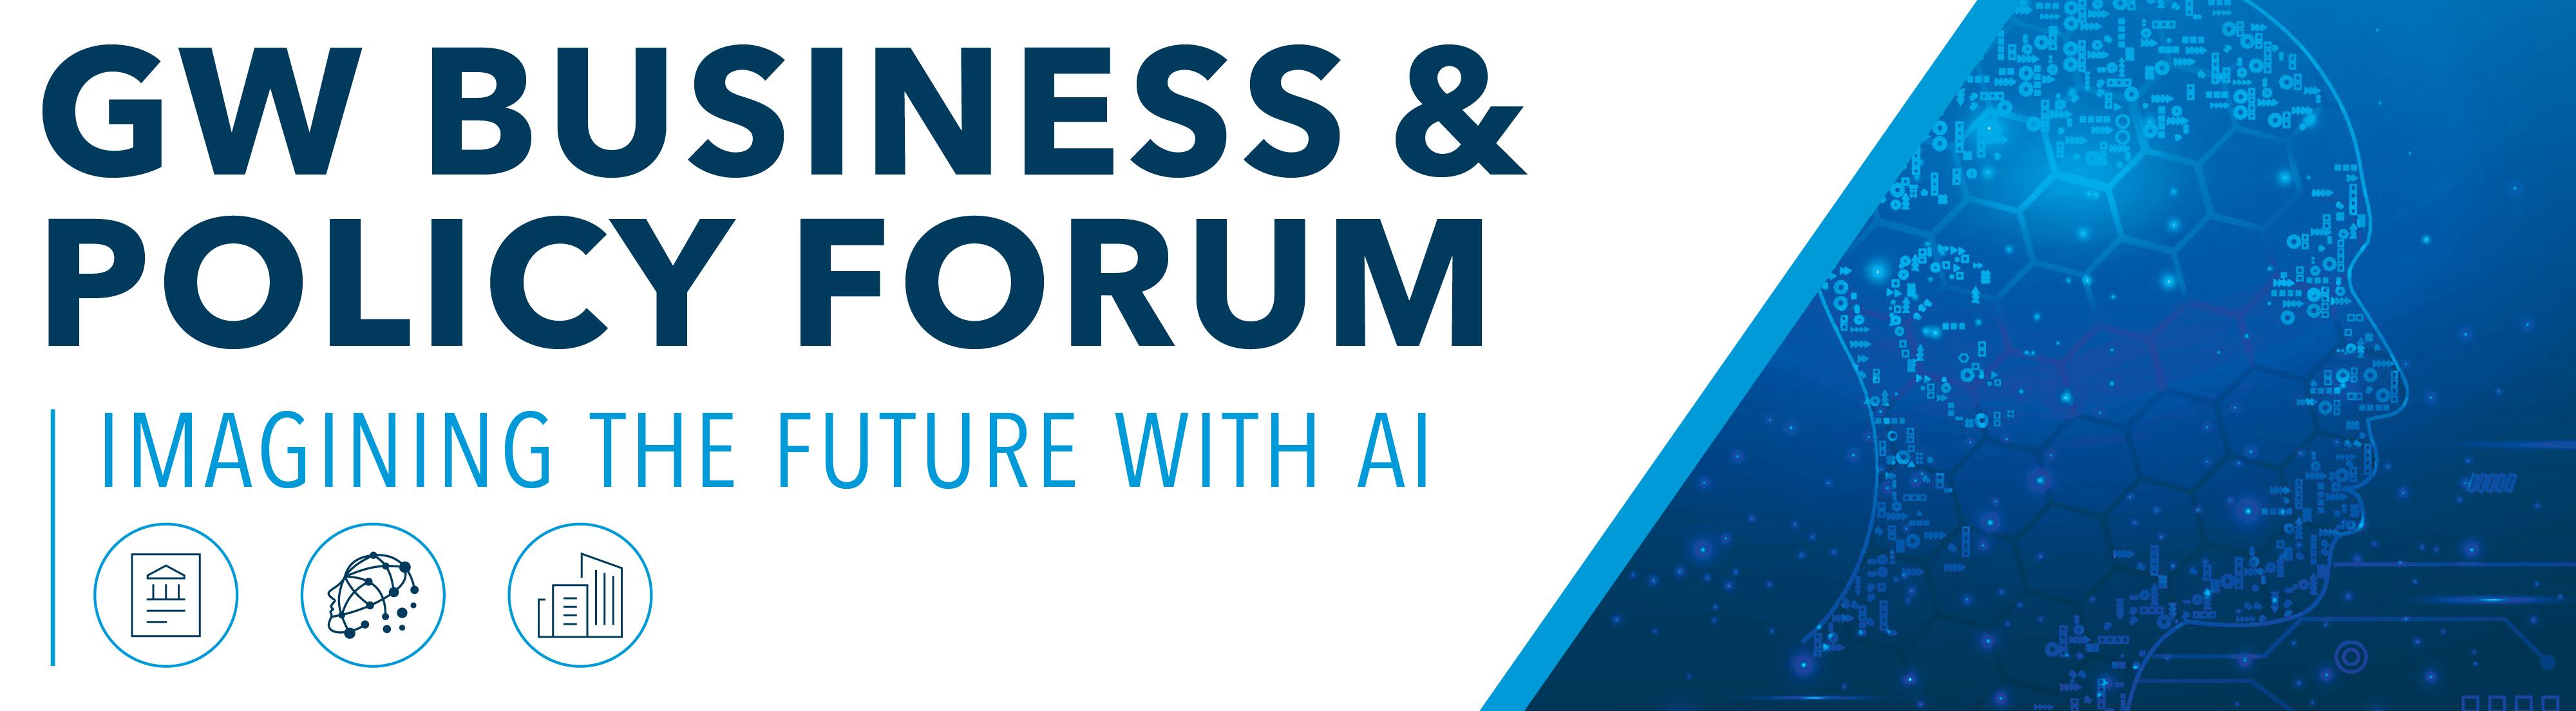 The 2024 GW Business and Policy Forum: Imagining the Future with AI. Header image features three graphic design icons representing artificial intelligence and a background image of a digitized face in profile.